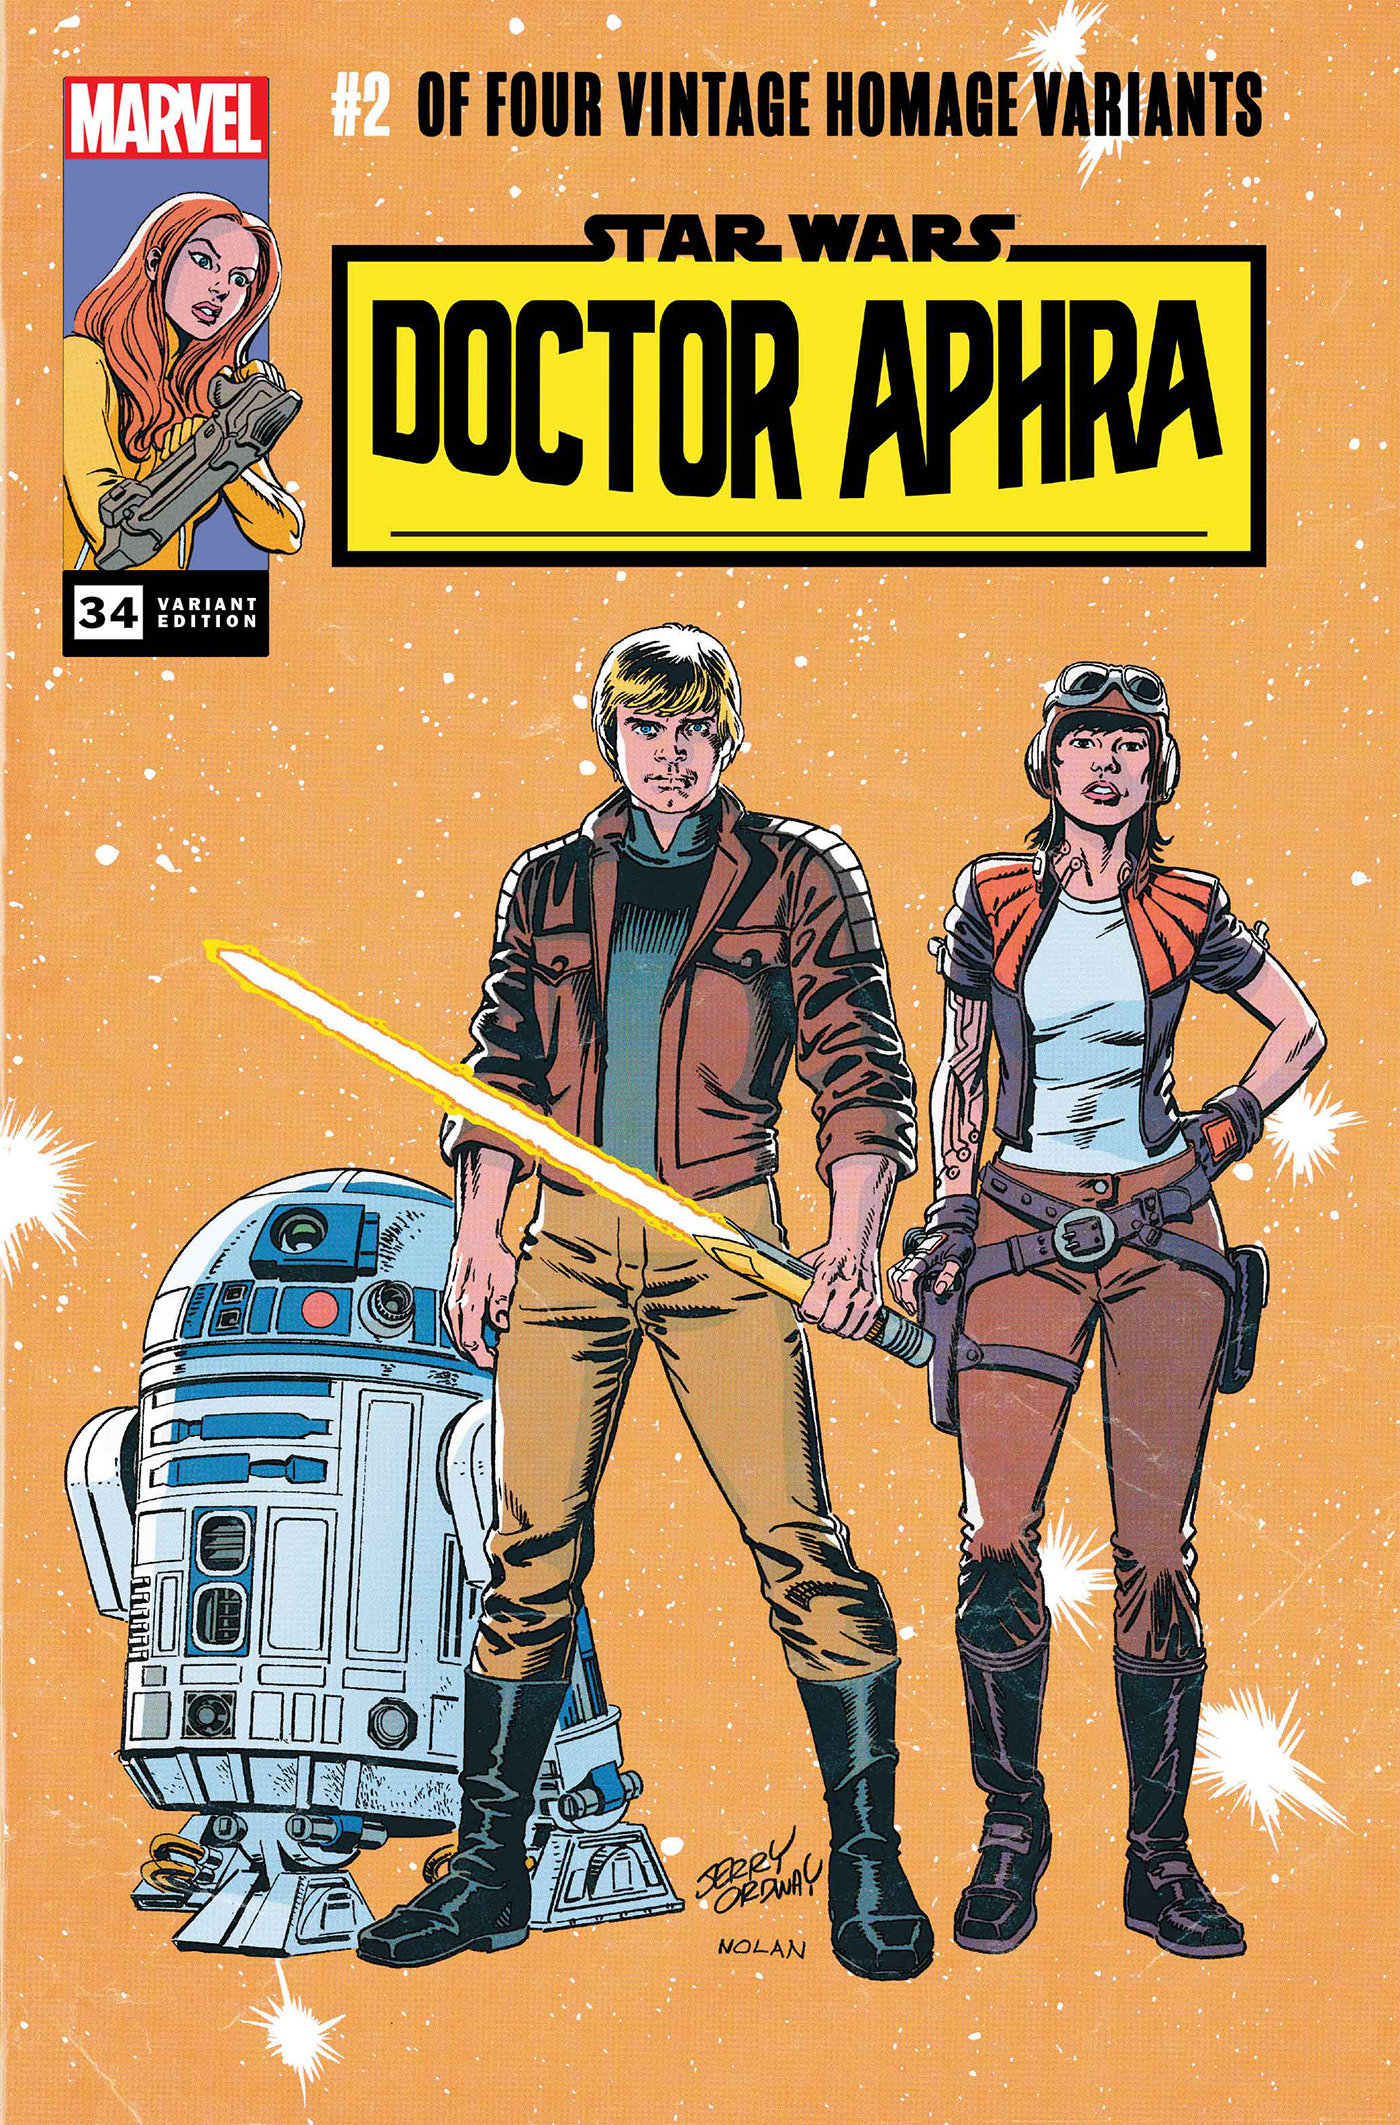 Star Wars: Doctor Aphra #34 Jerry Ordway Classic Trade Dress Variant